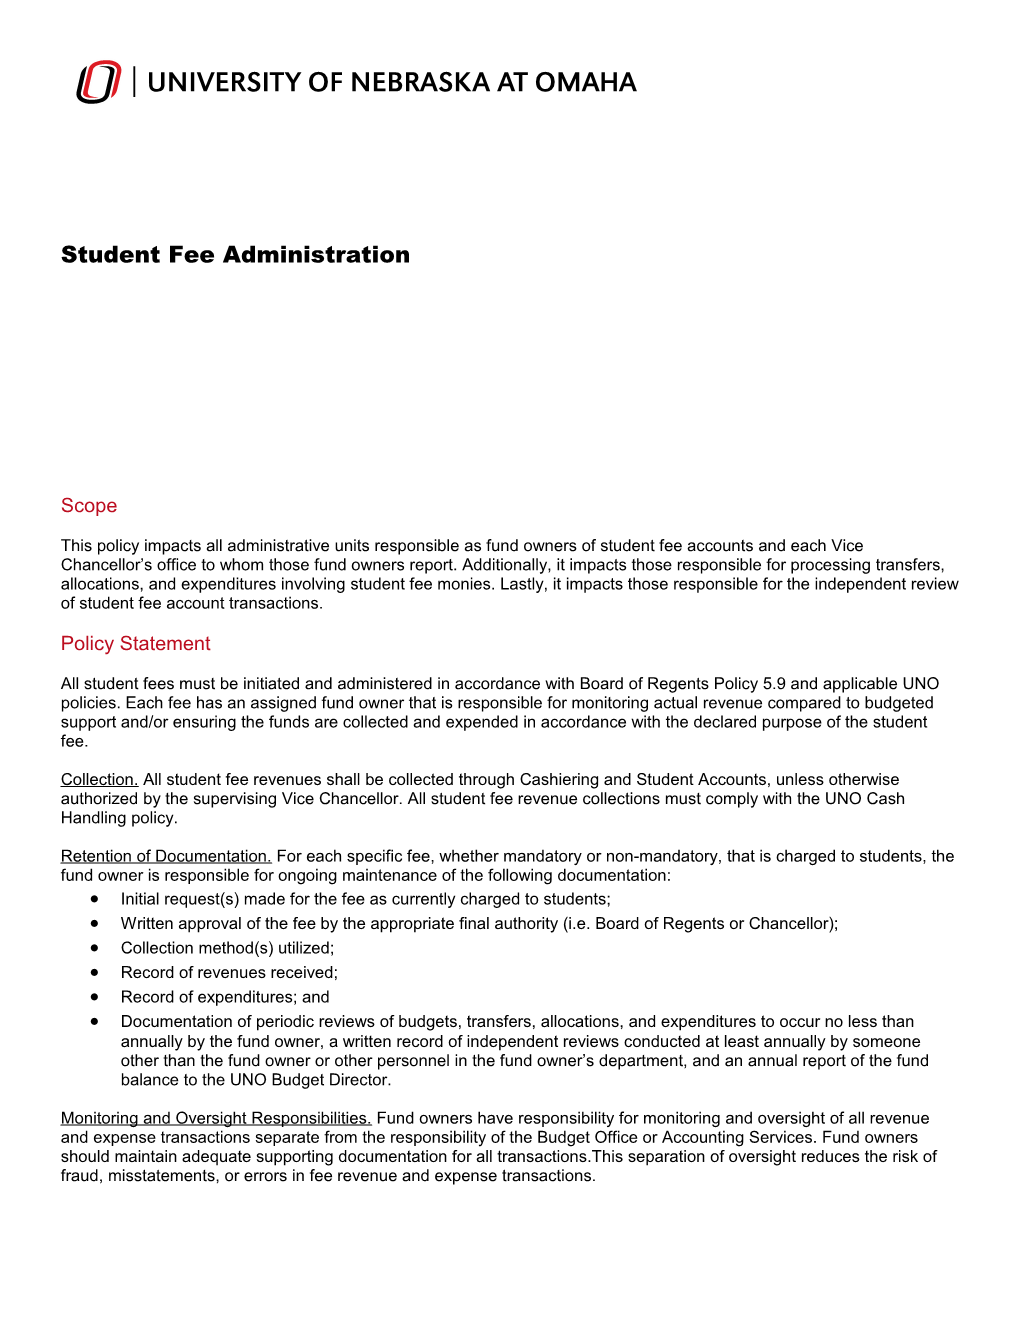 Student Fee Administration